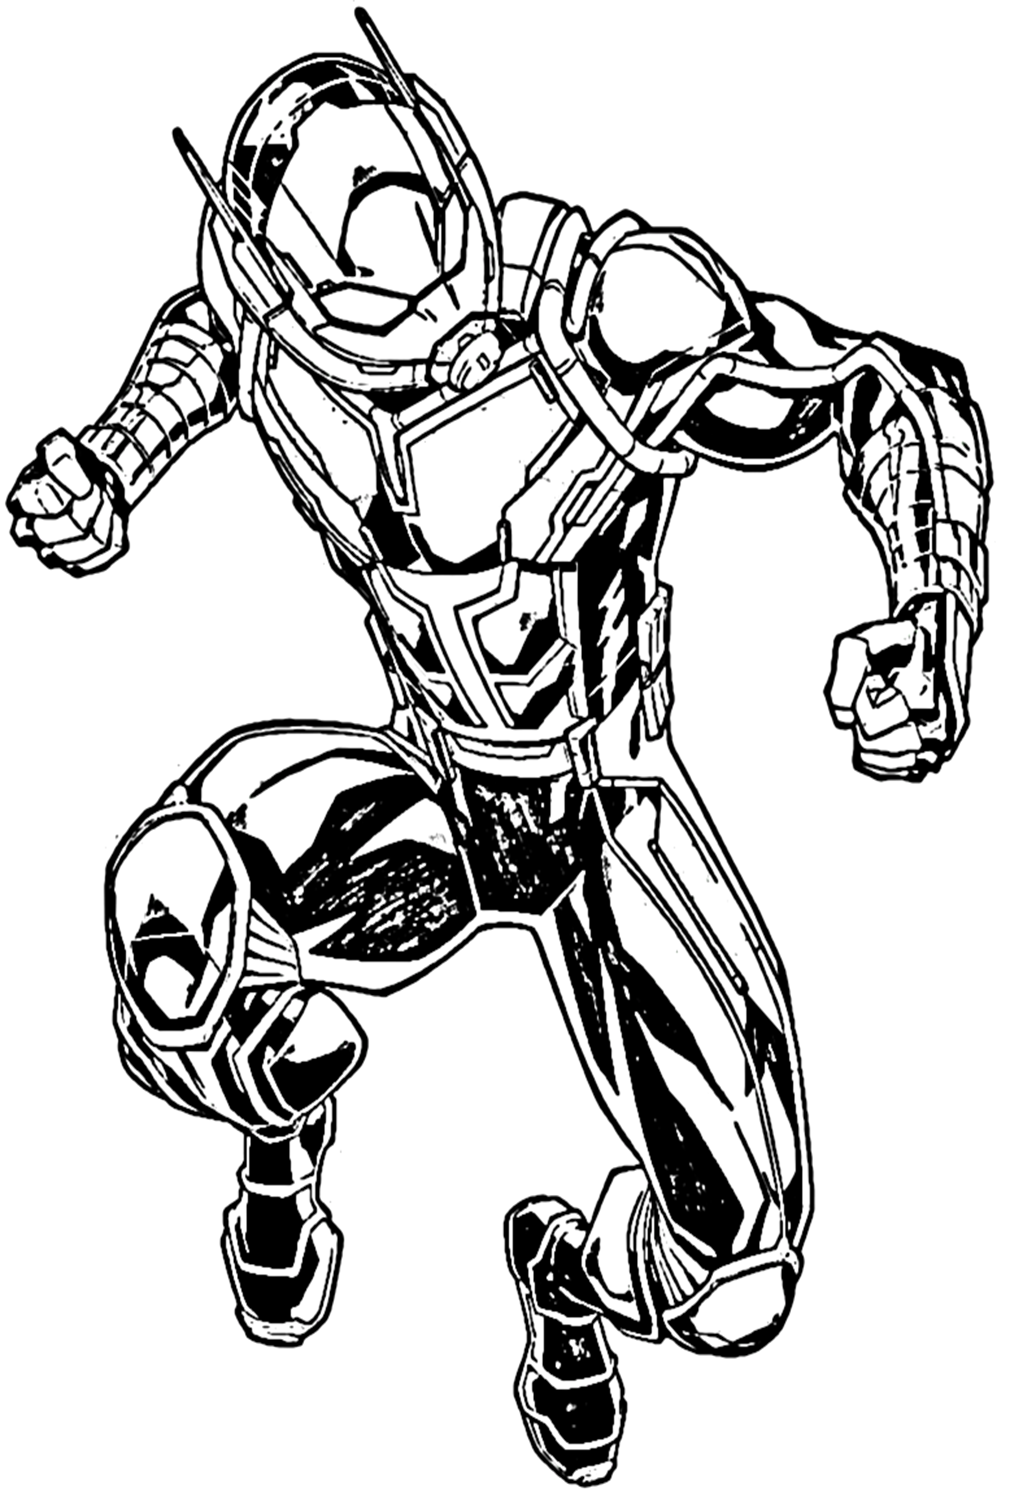 Ant-man Prepares To Hit The Punch Coloring Page